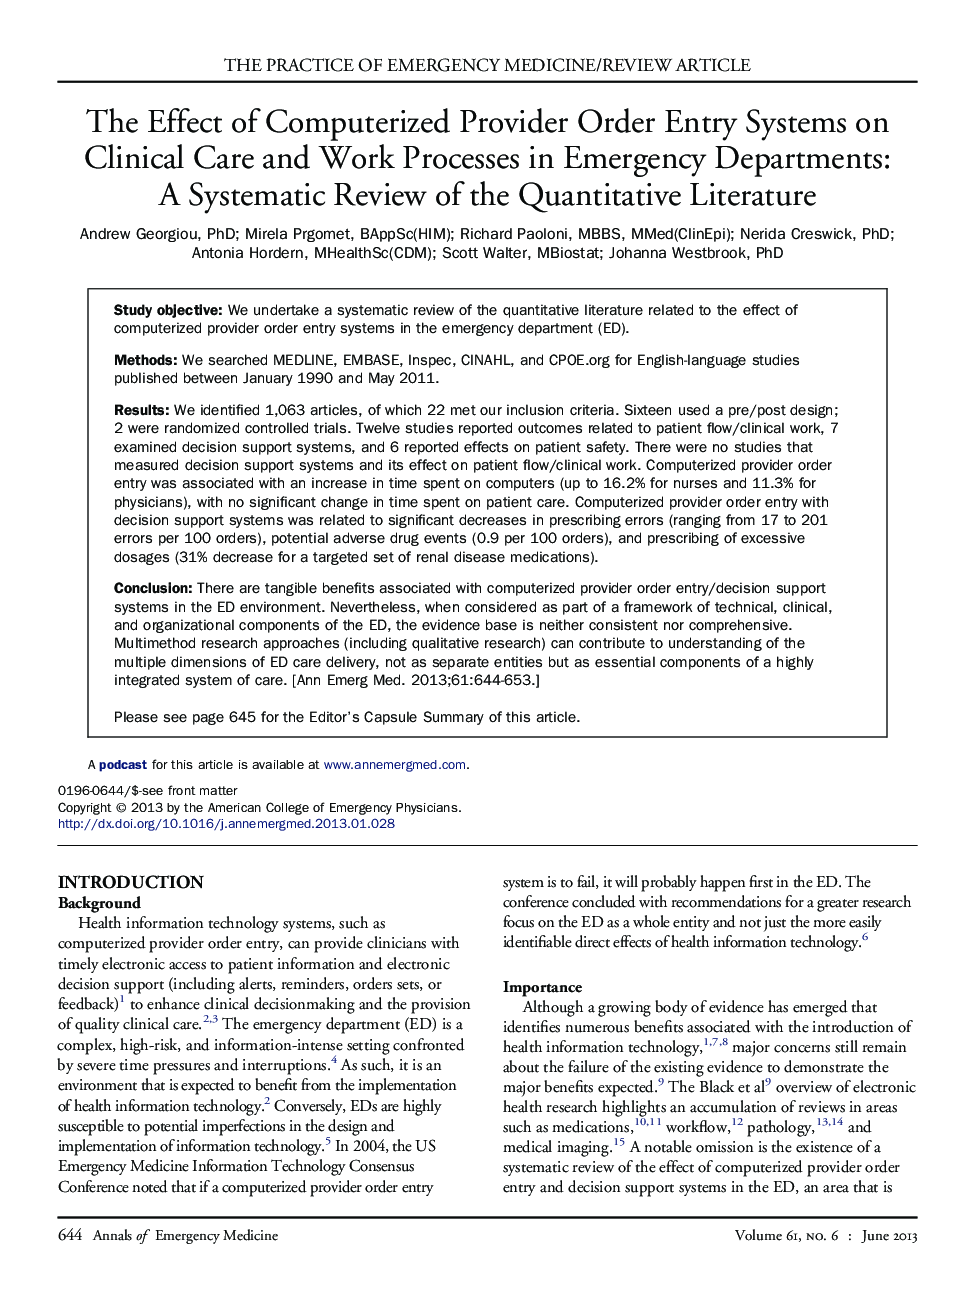 The Effect of Computerized Provider Order Entry Systems on Clinical Care and Work Processes in Emergency Departments: A Systematic Review of the Quantitative Literature